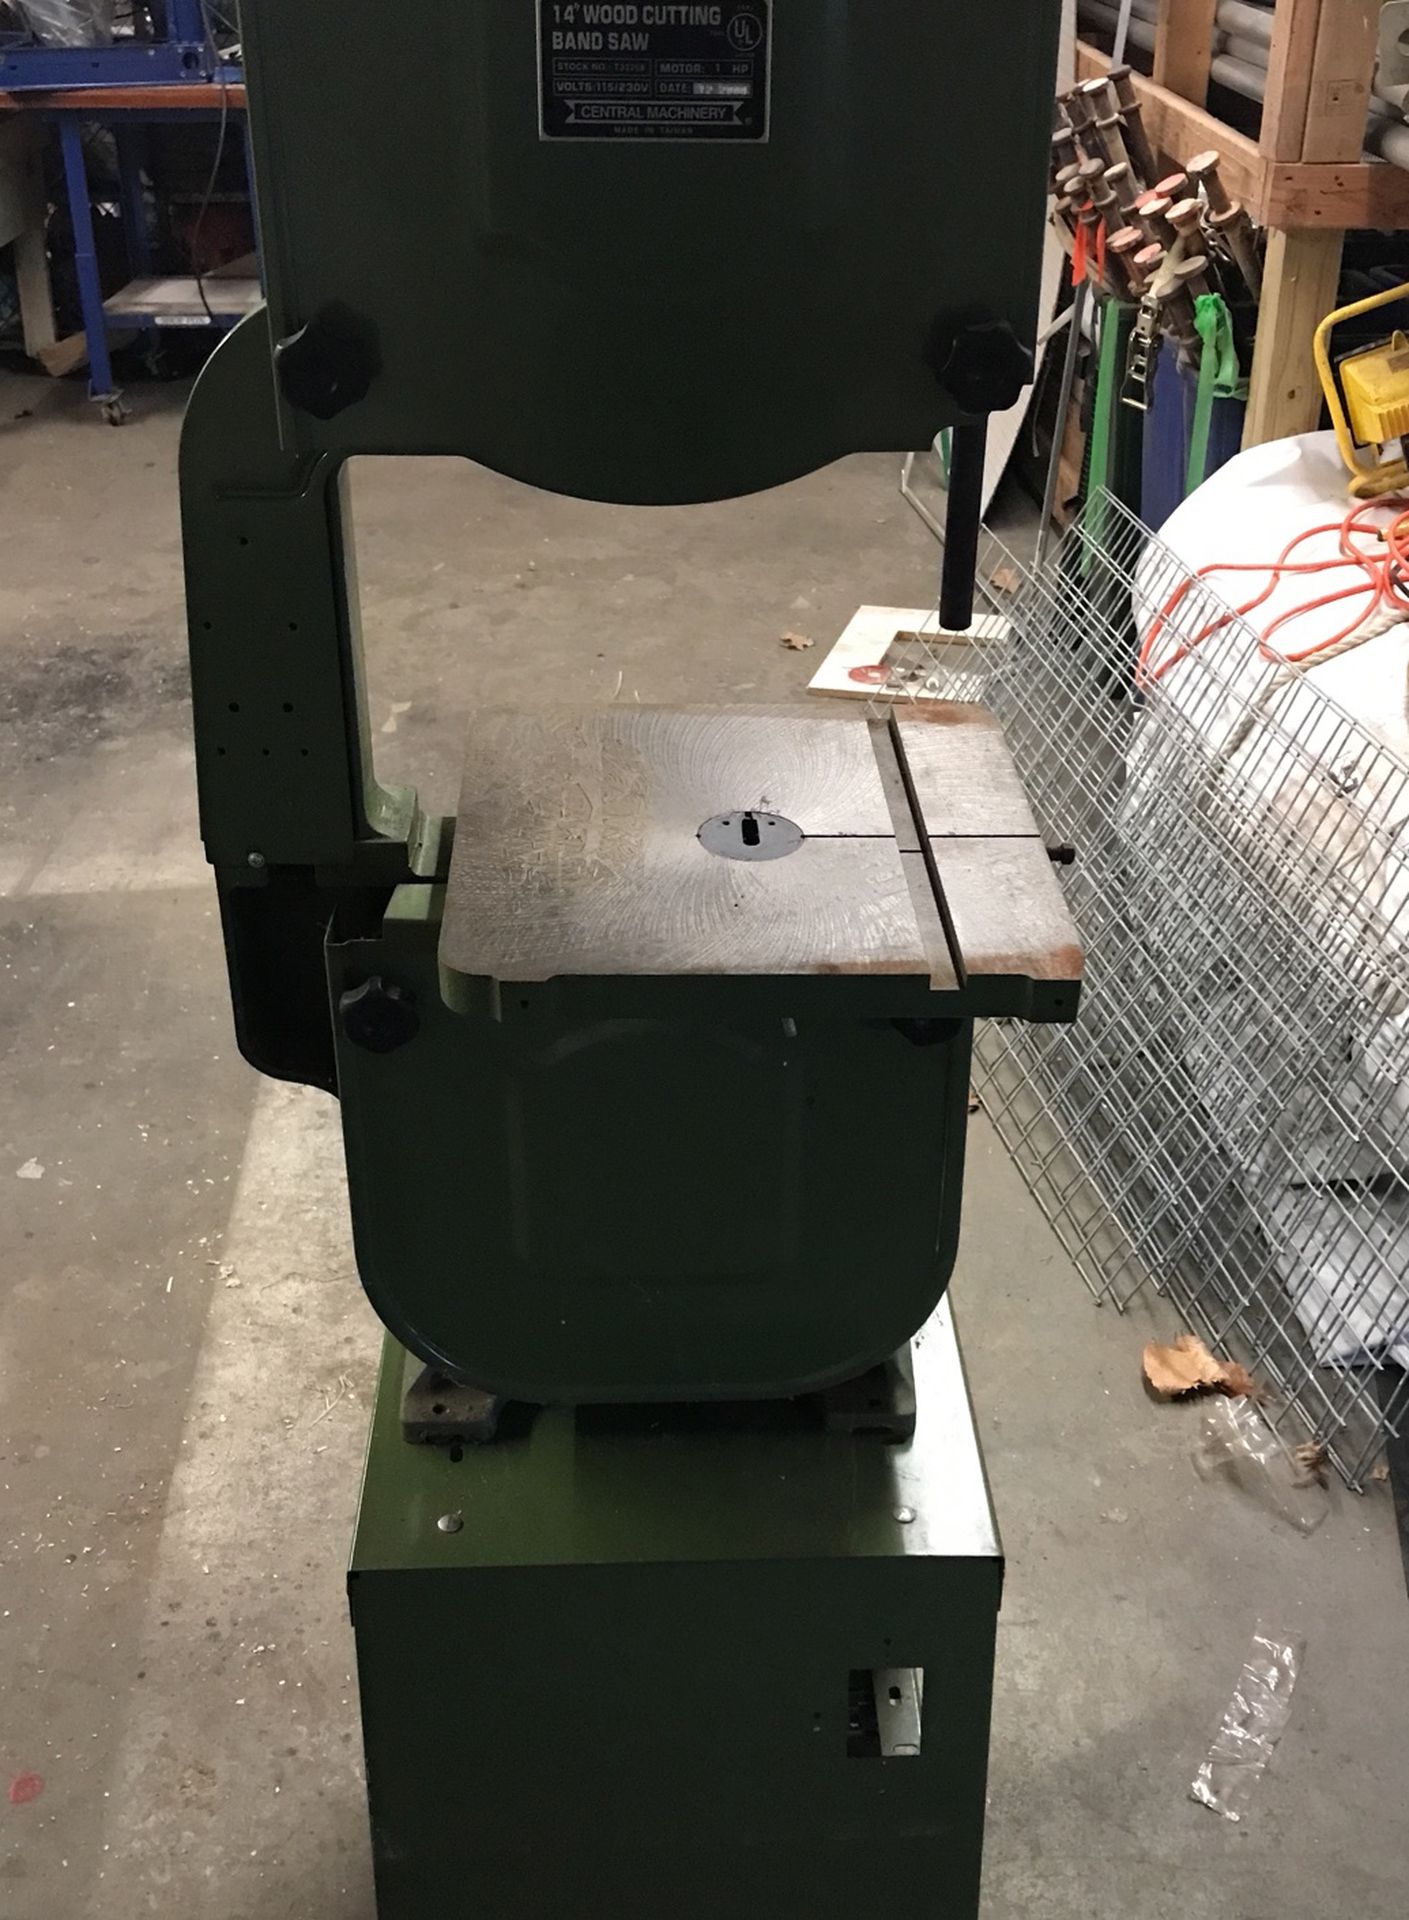 Central Machinery 14 Bandsaw *parts*